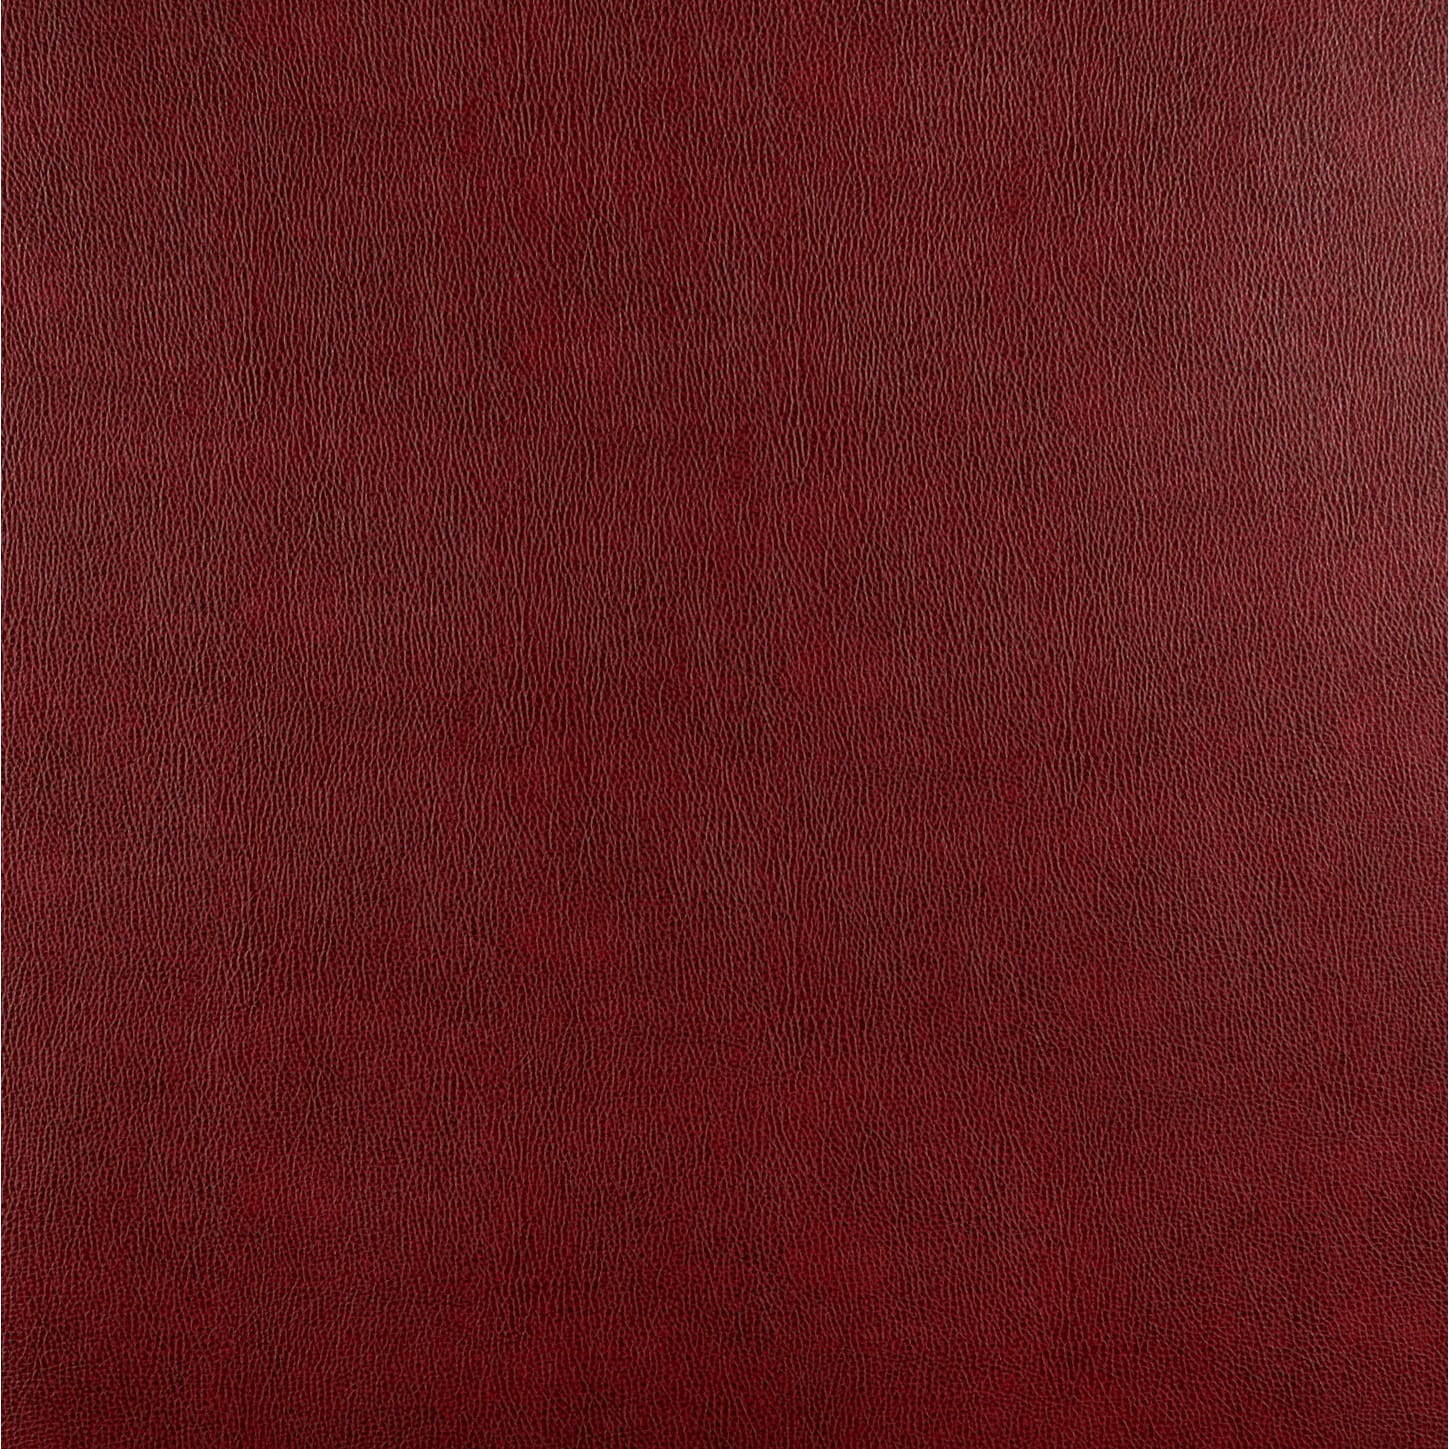 G548 Burgundy Upholstery Grade Recycled Bonded Leather (By The Yard